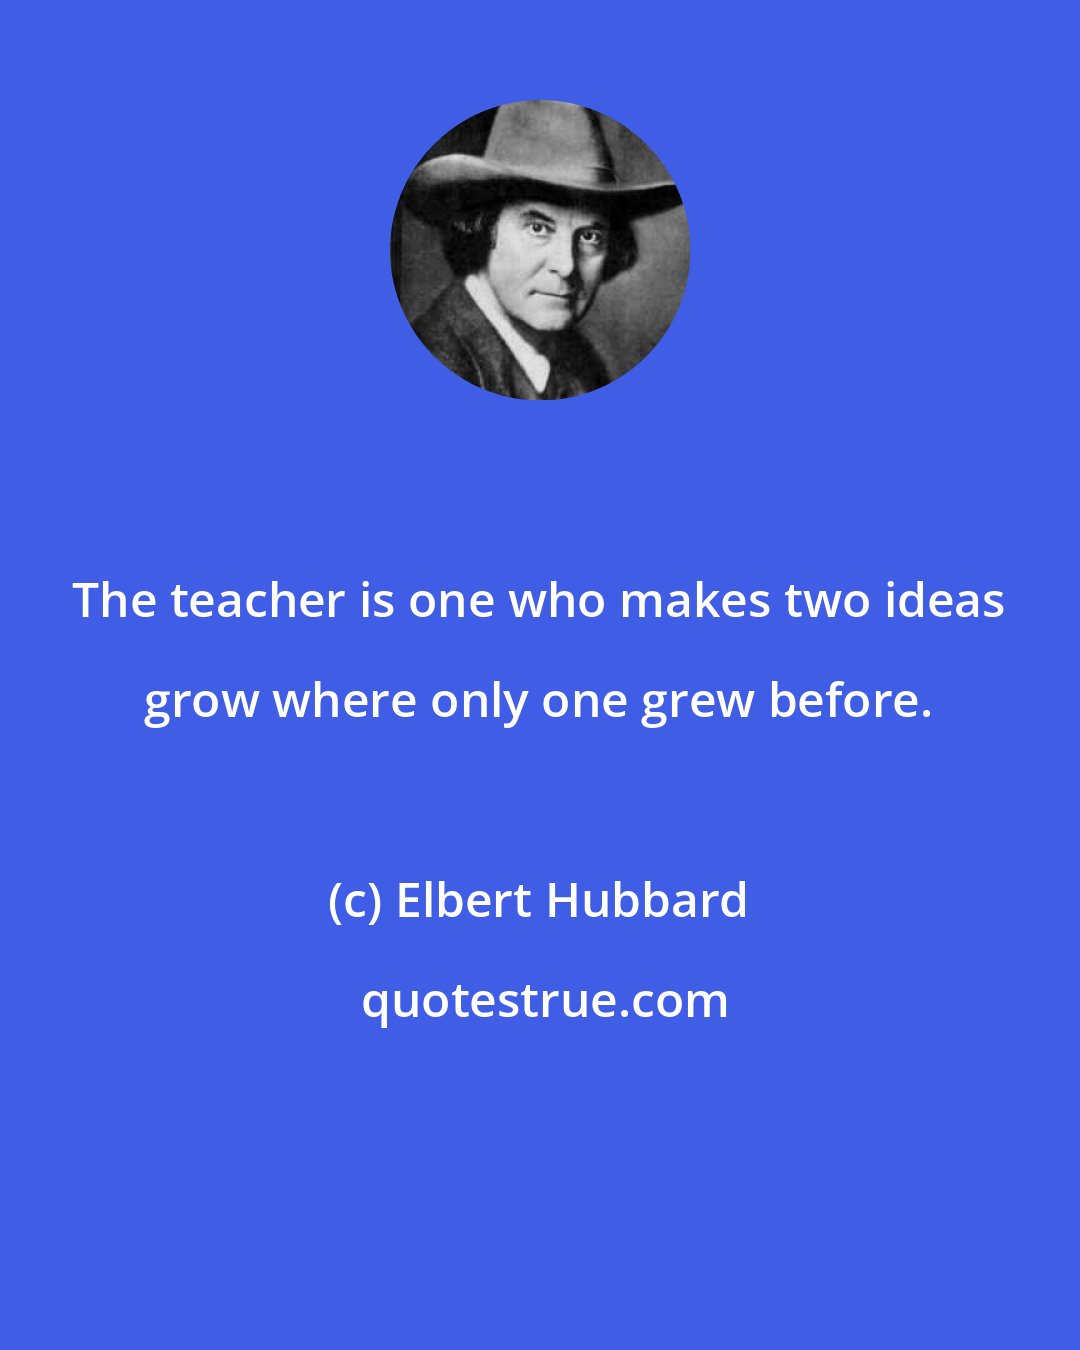 Elbert Hubbard: The teacher is one who makes two ideas grow where only one grew before.